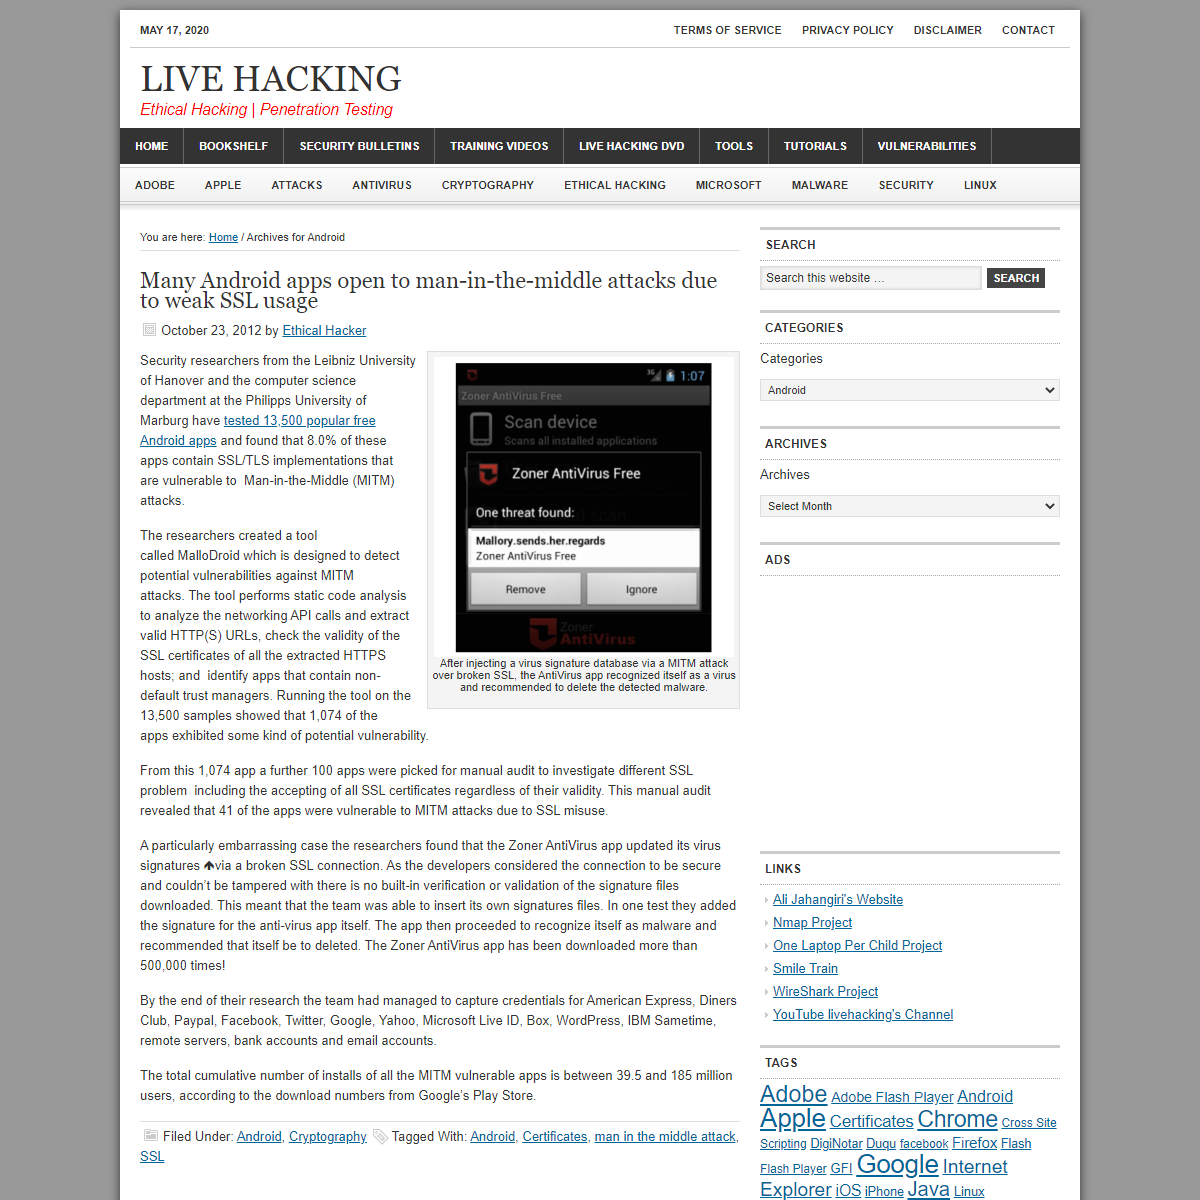 A complete backup of http://www.livehacking.com/category/android/